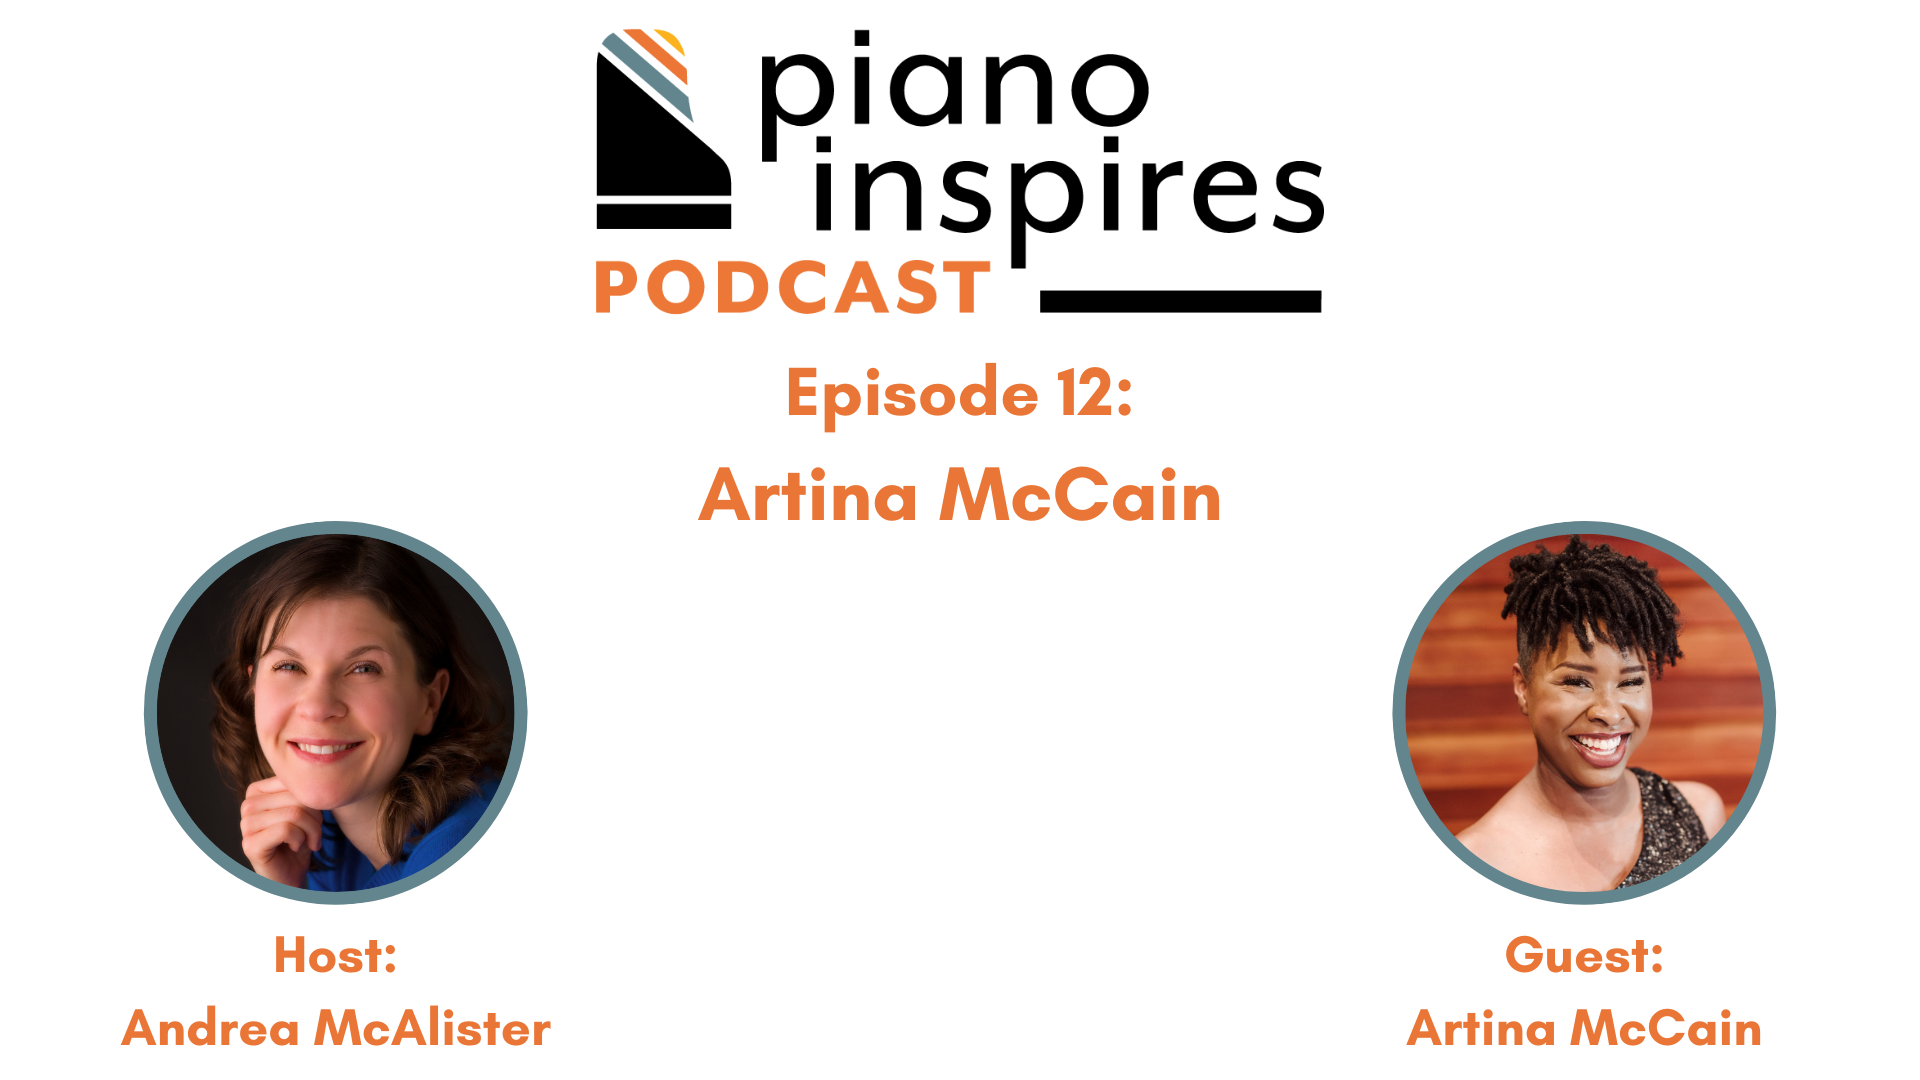 Episode 12: Concert Pianist Artina McCain discusses Wellness, Dealing with Piano-Related Injury, and Persistence